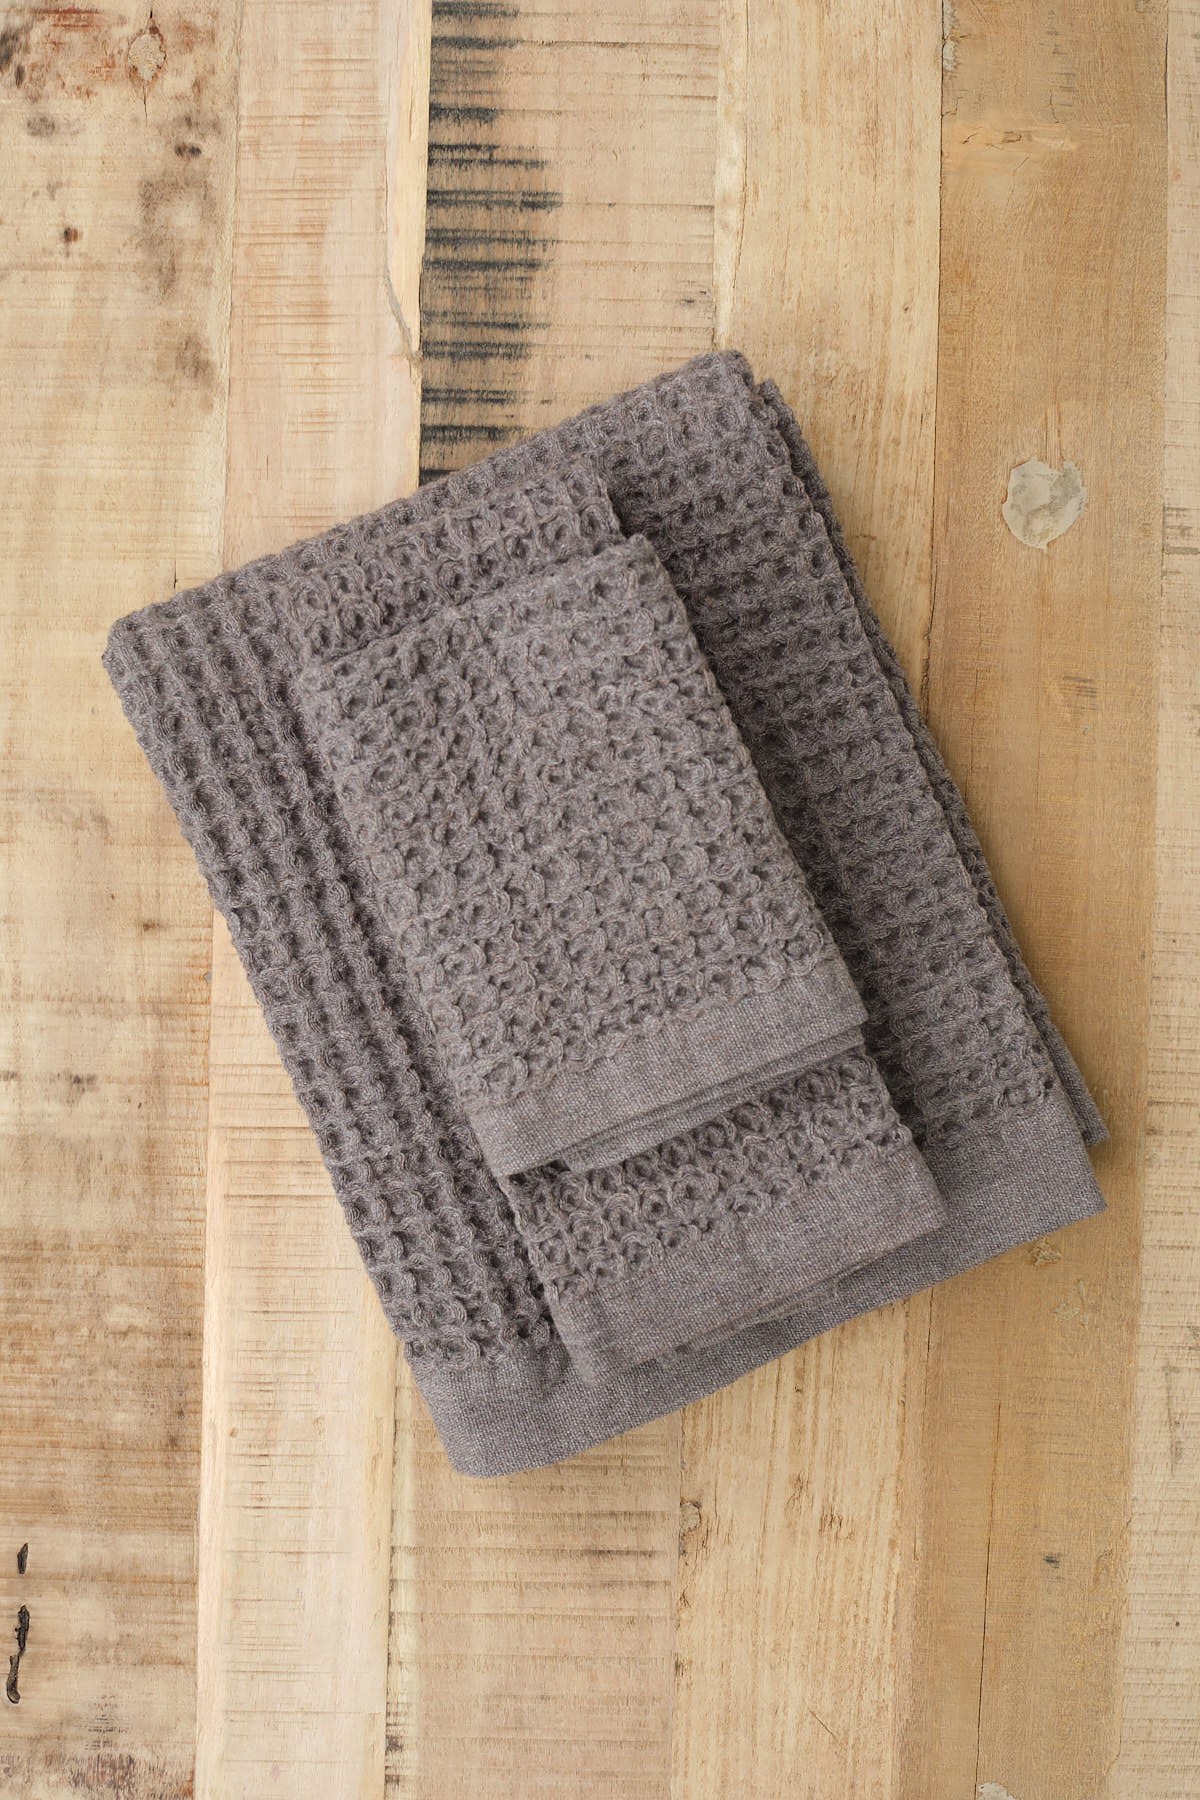 kontex cotton waffle towels in charcoal